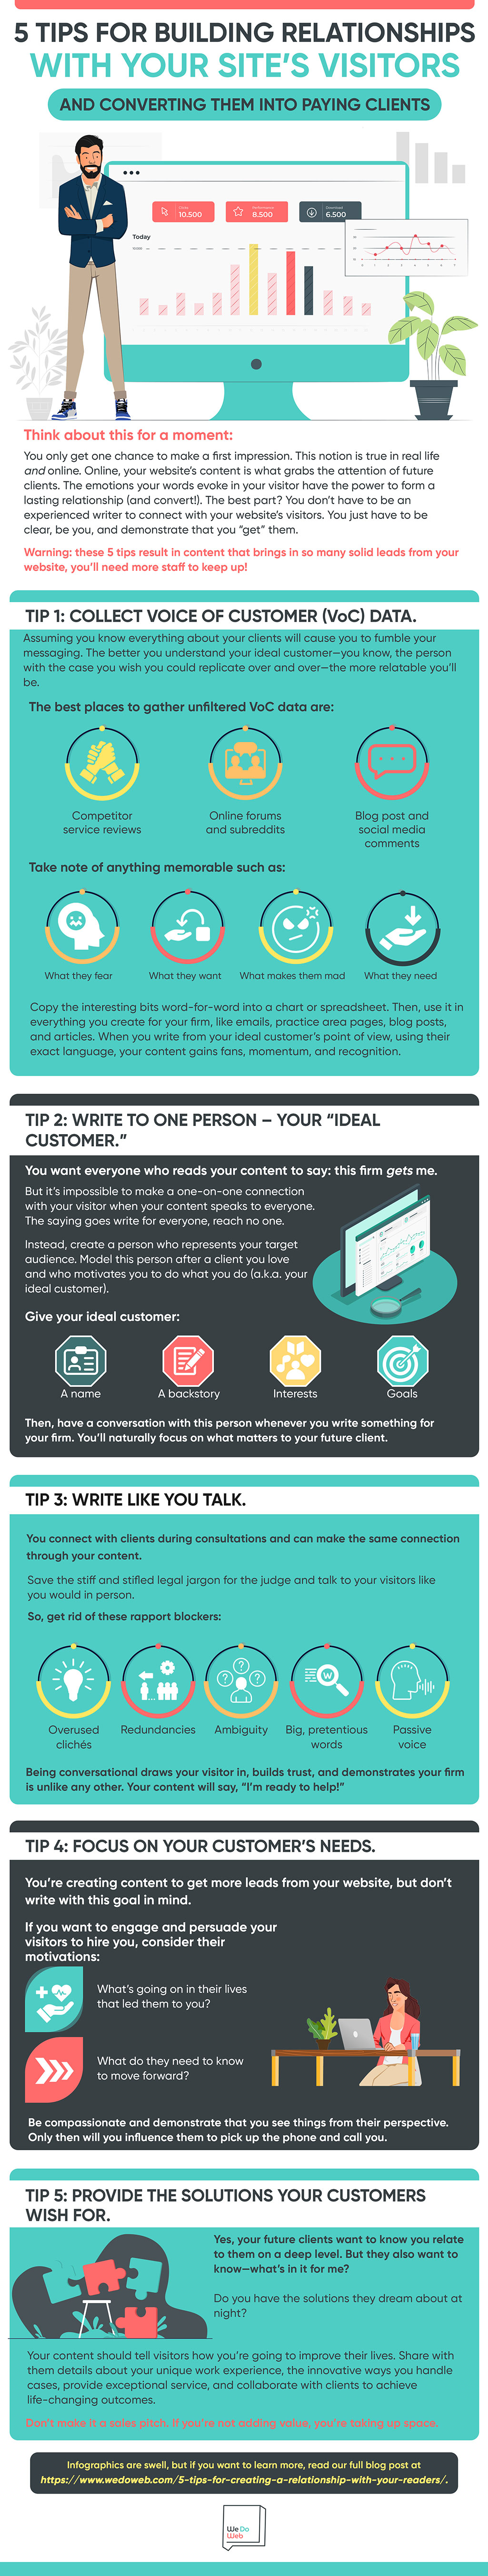 5 Tips for Building Relationships With Your Website Visitors